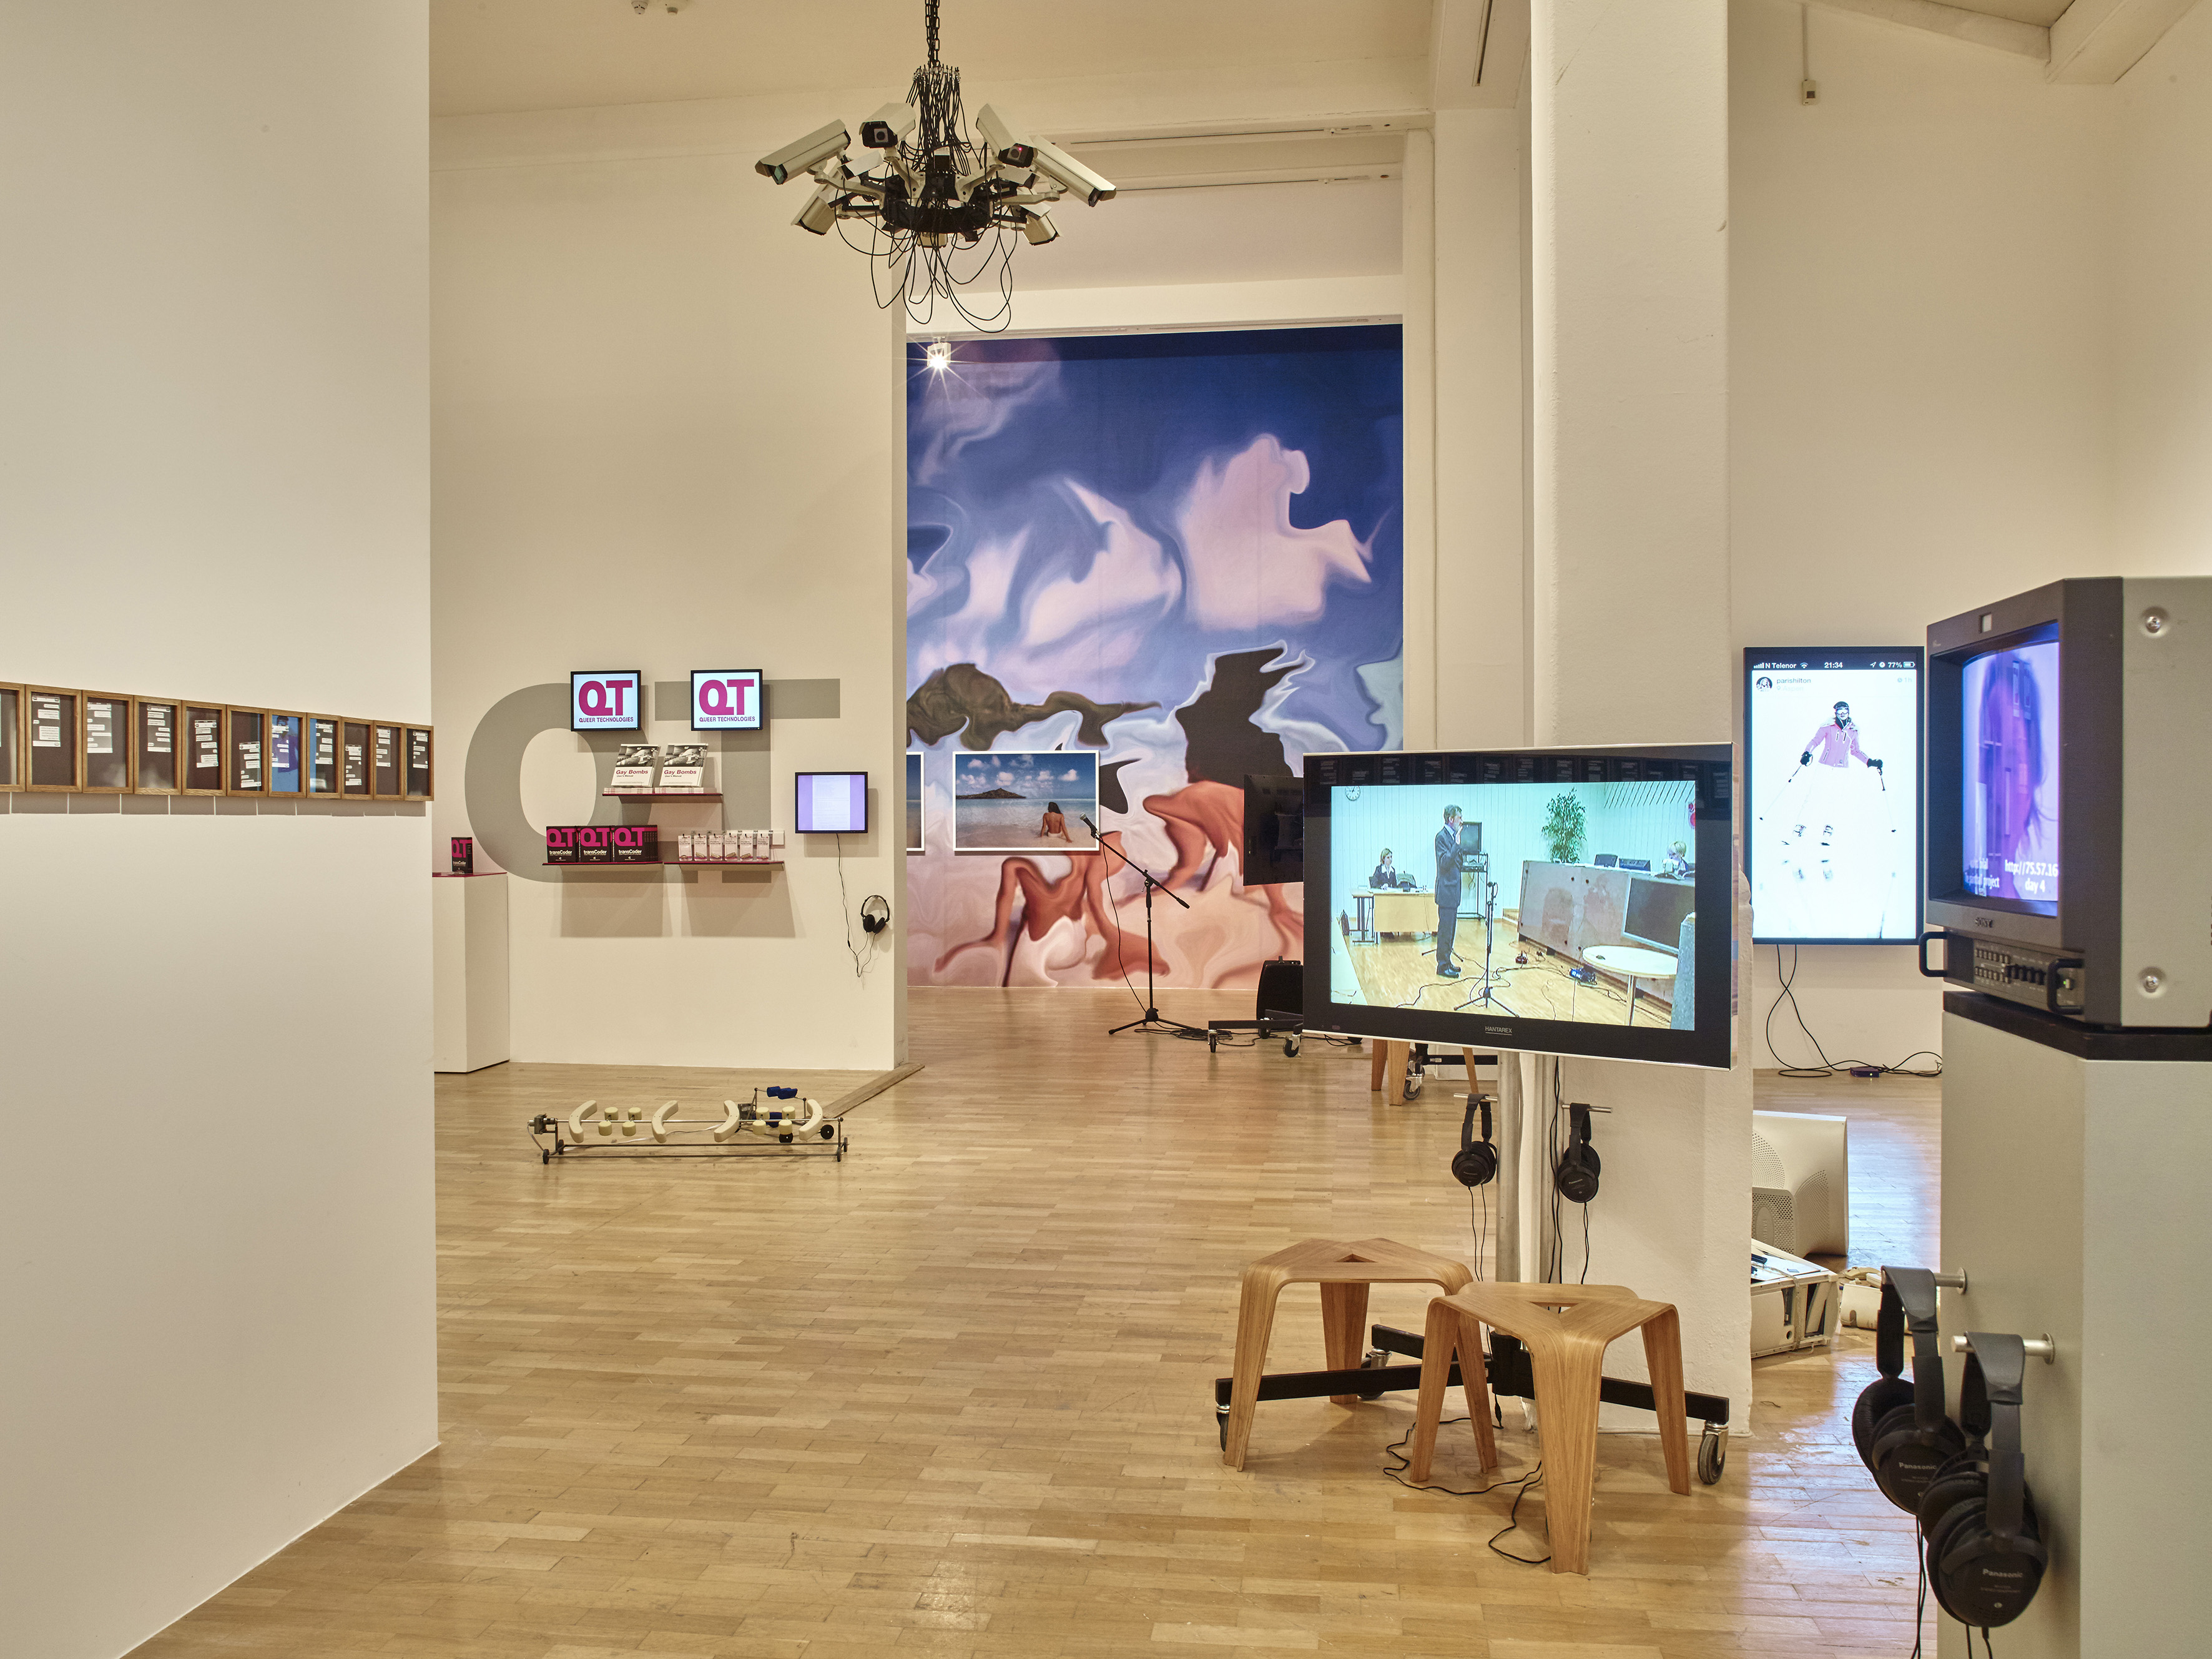 Art and technology: what does it mean for visual culture? | Arts